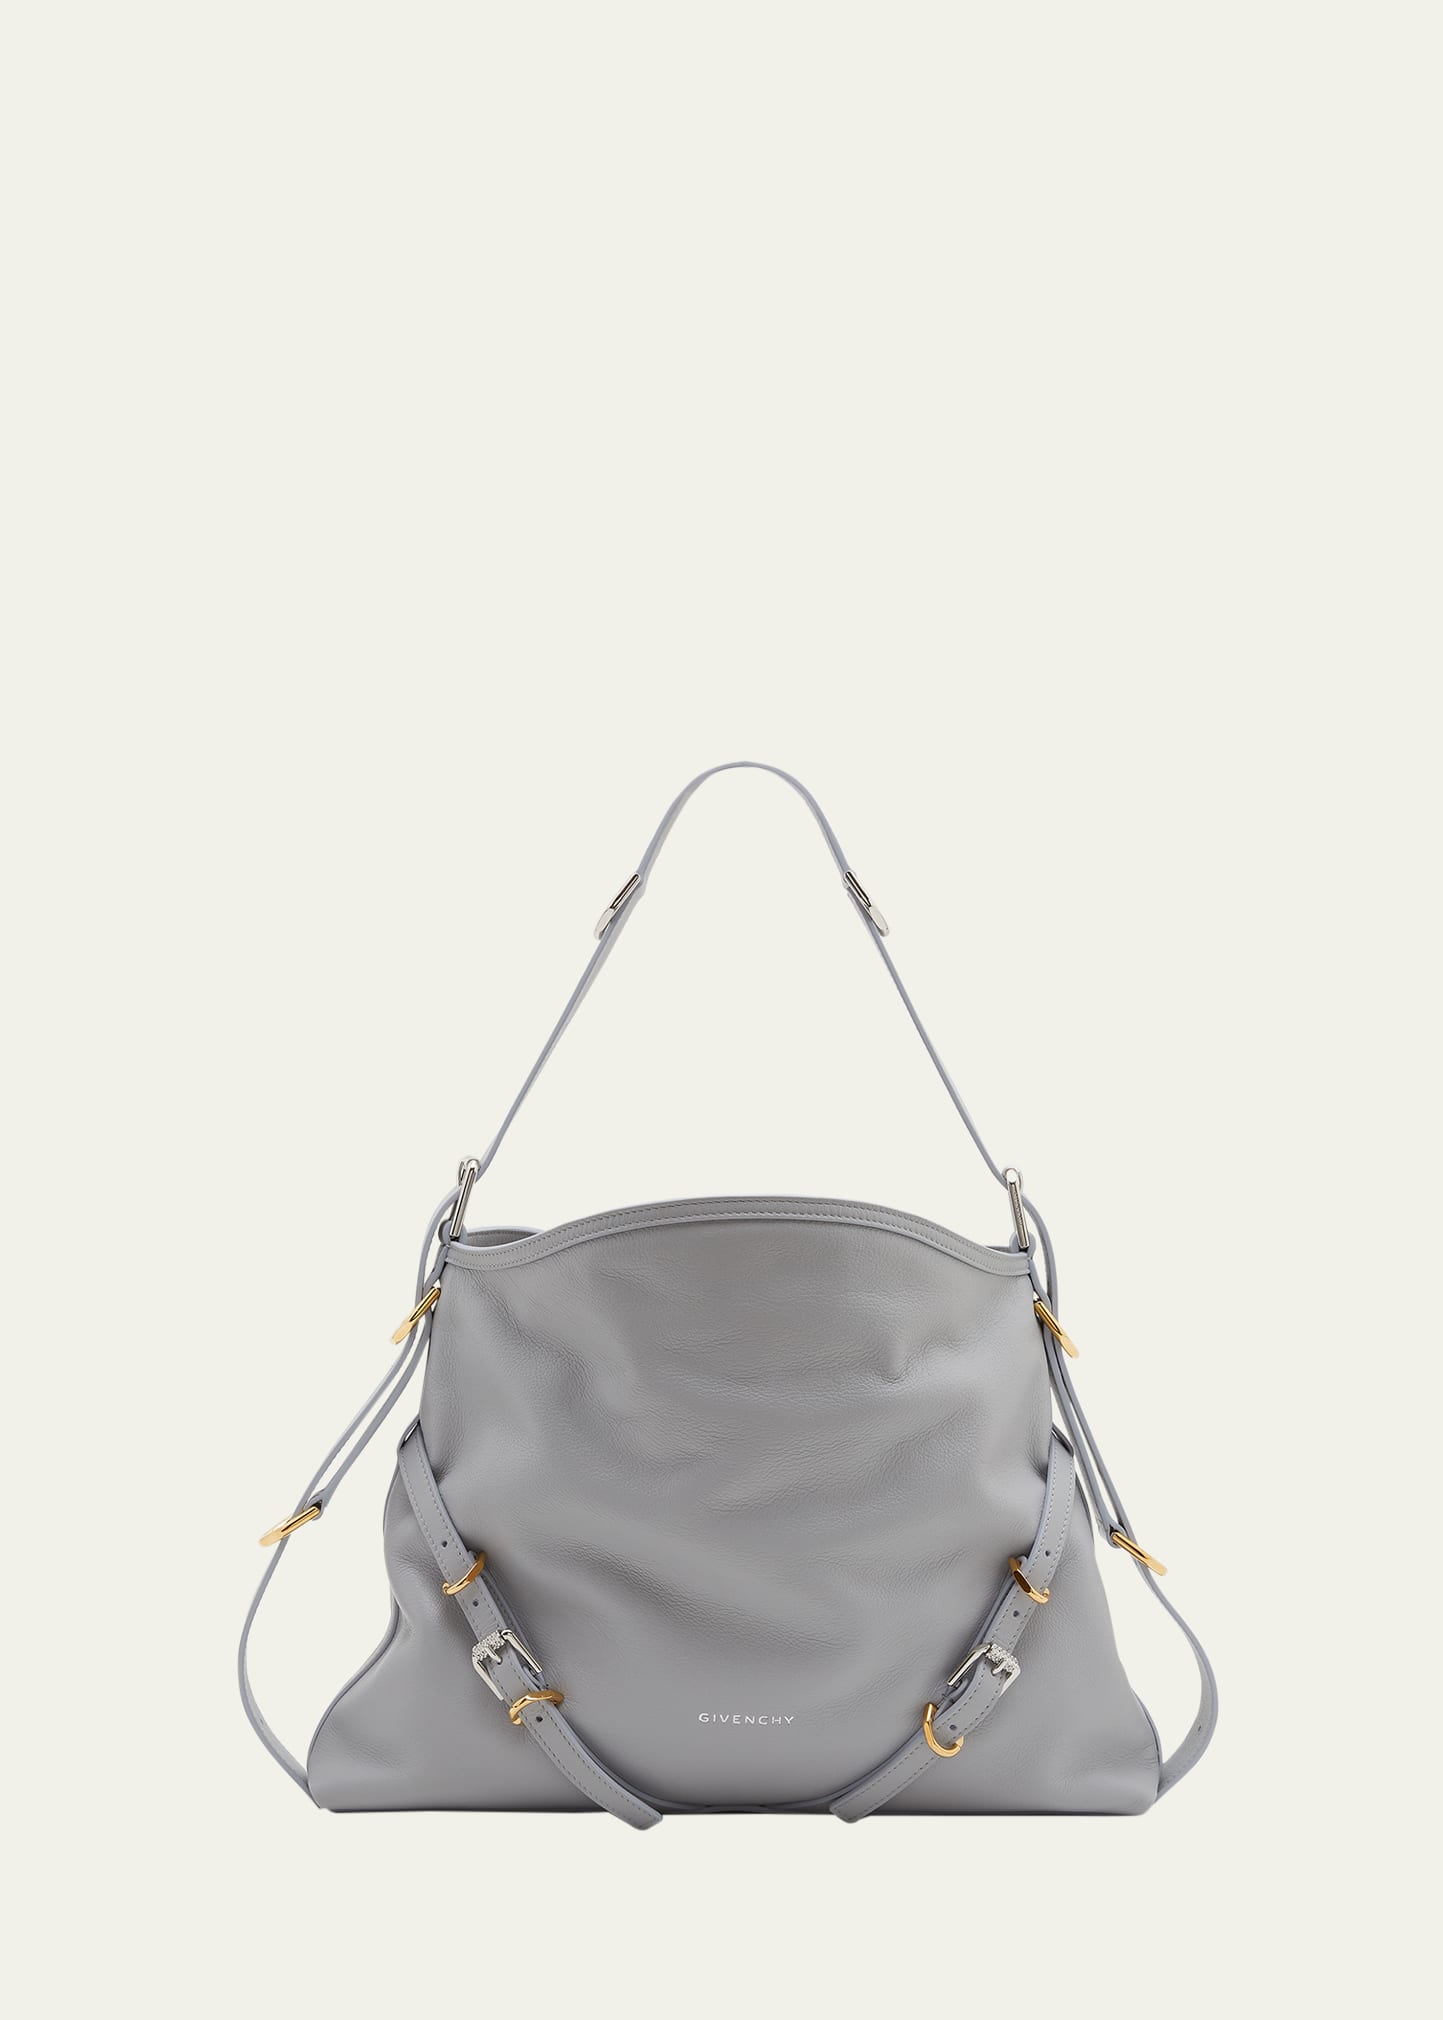 Givenchy Medium Voyou Buckle Shoulder Bag In Tumbled Leather In Light Grey